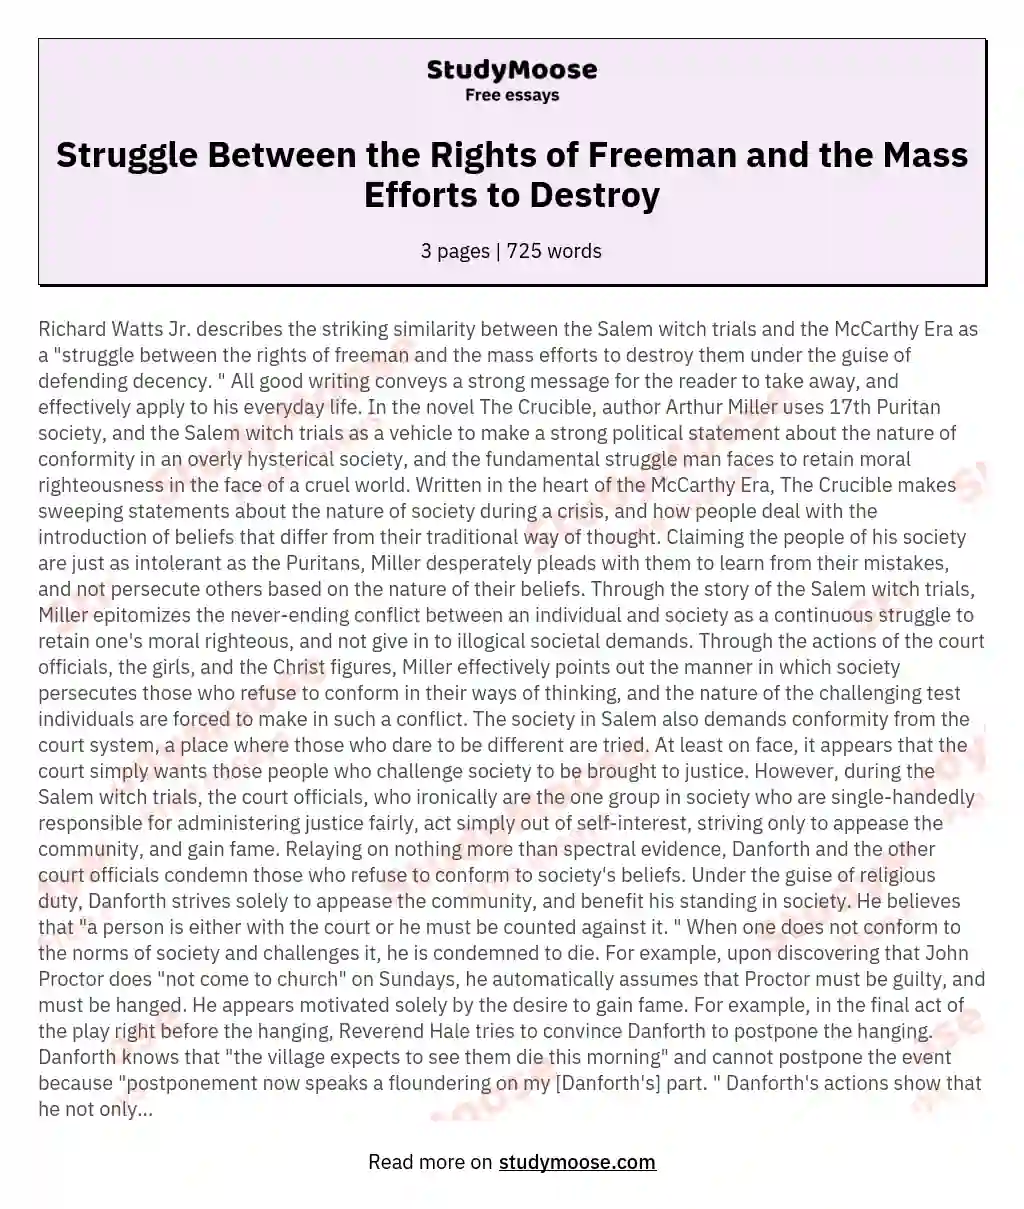 Struggle Between the Rights of Freeman and the Mass Efforts to Destroy essay